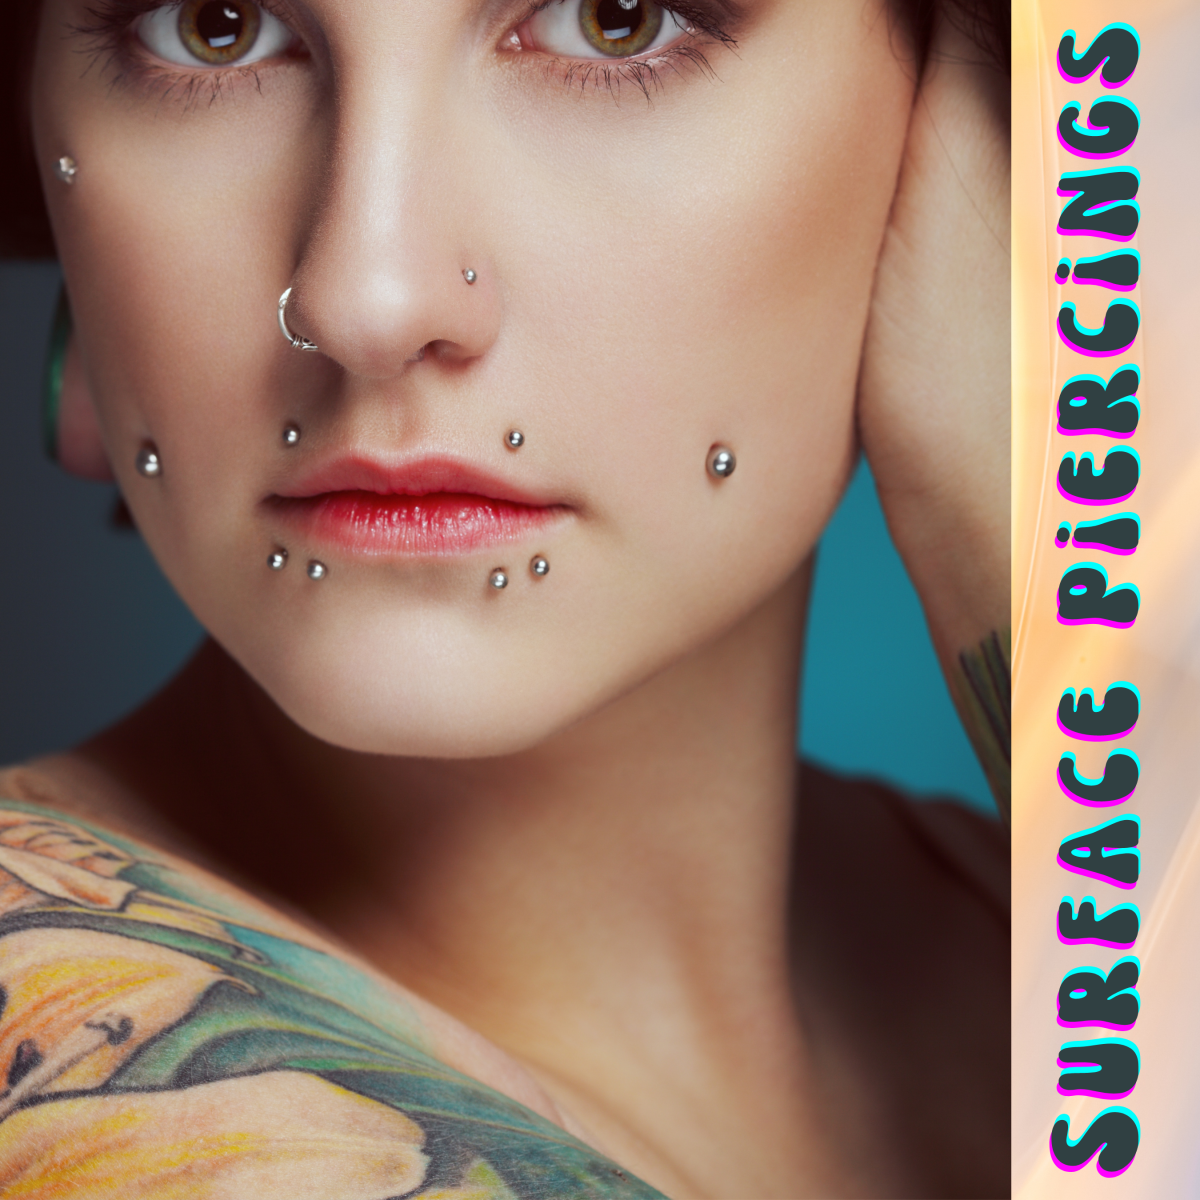 Extreme Body Mod:  Surface Piercings